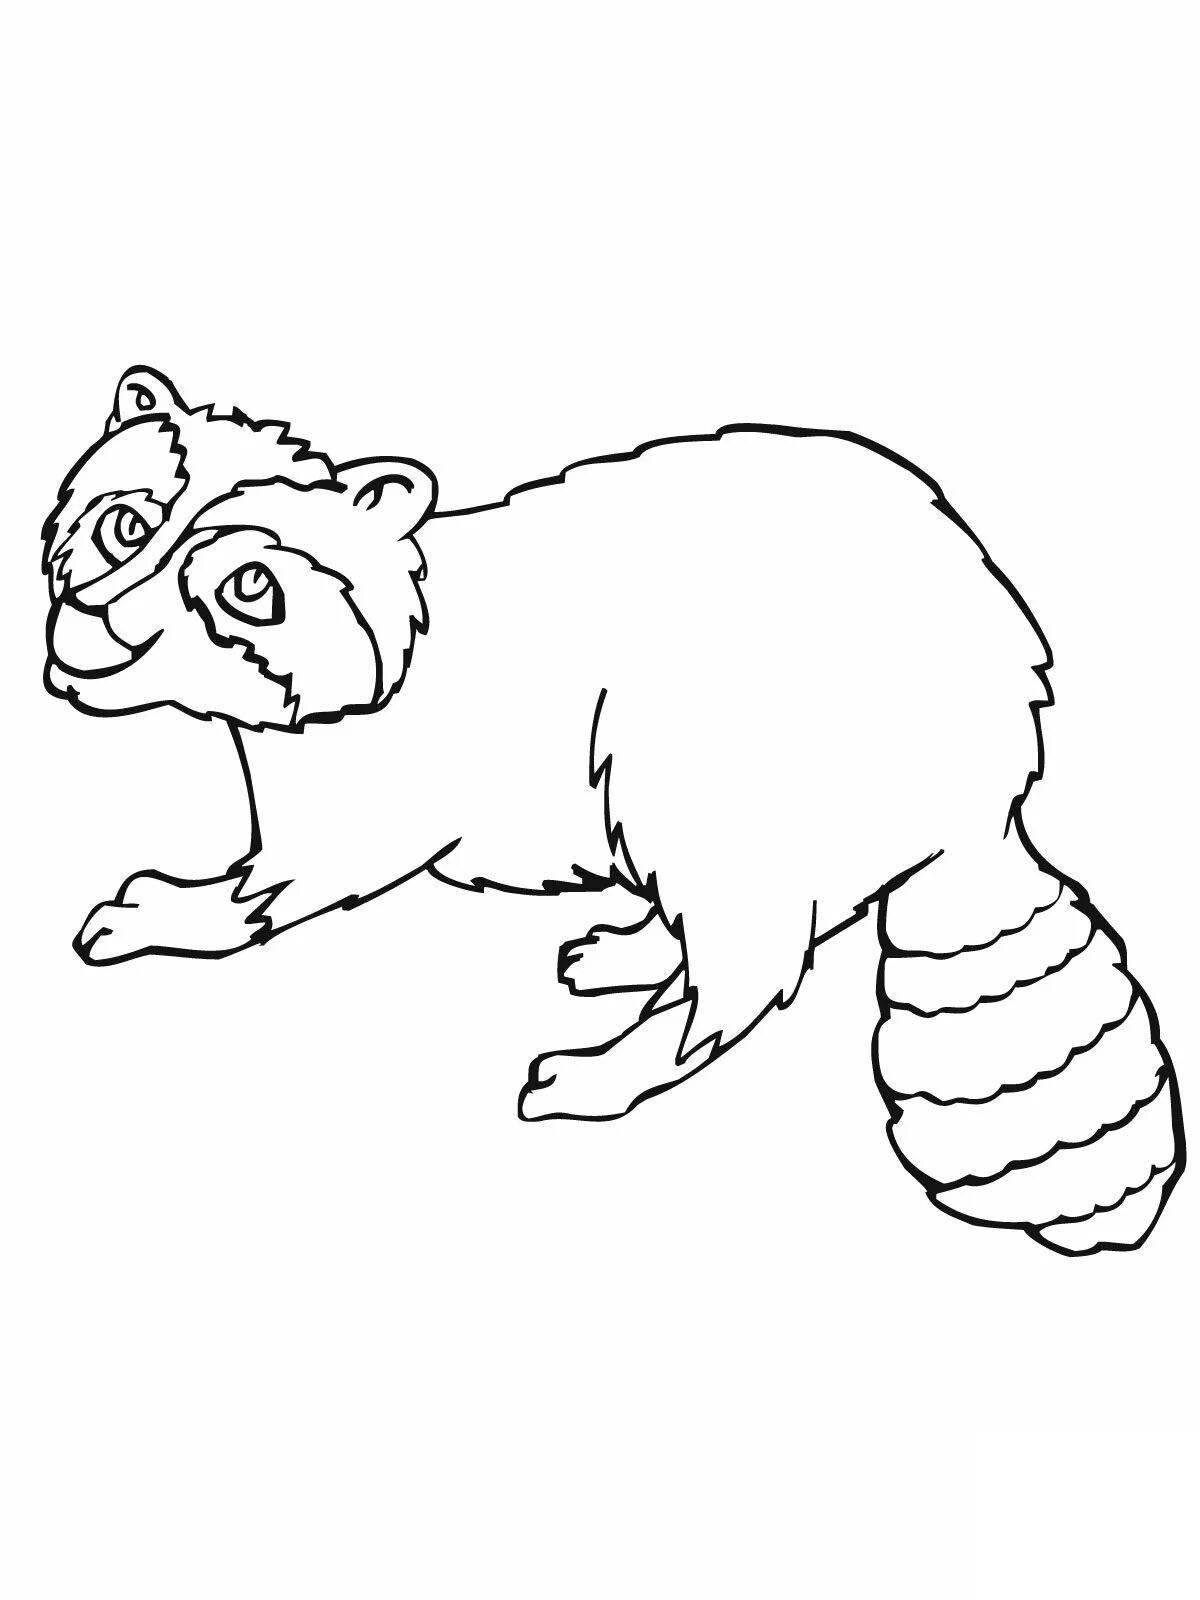 Colourful raccoon dog coloring page